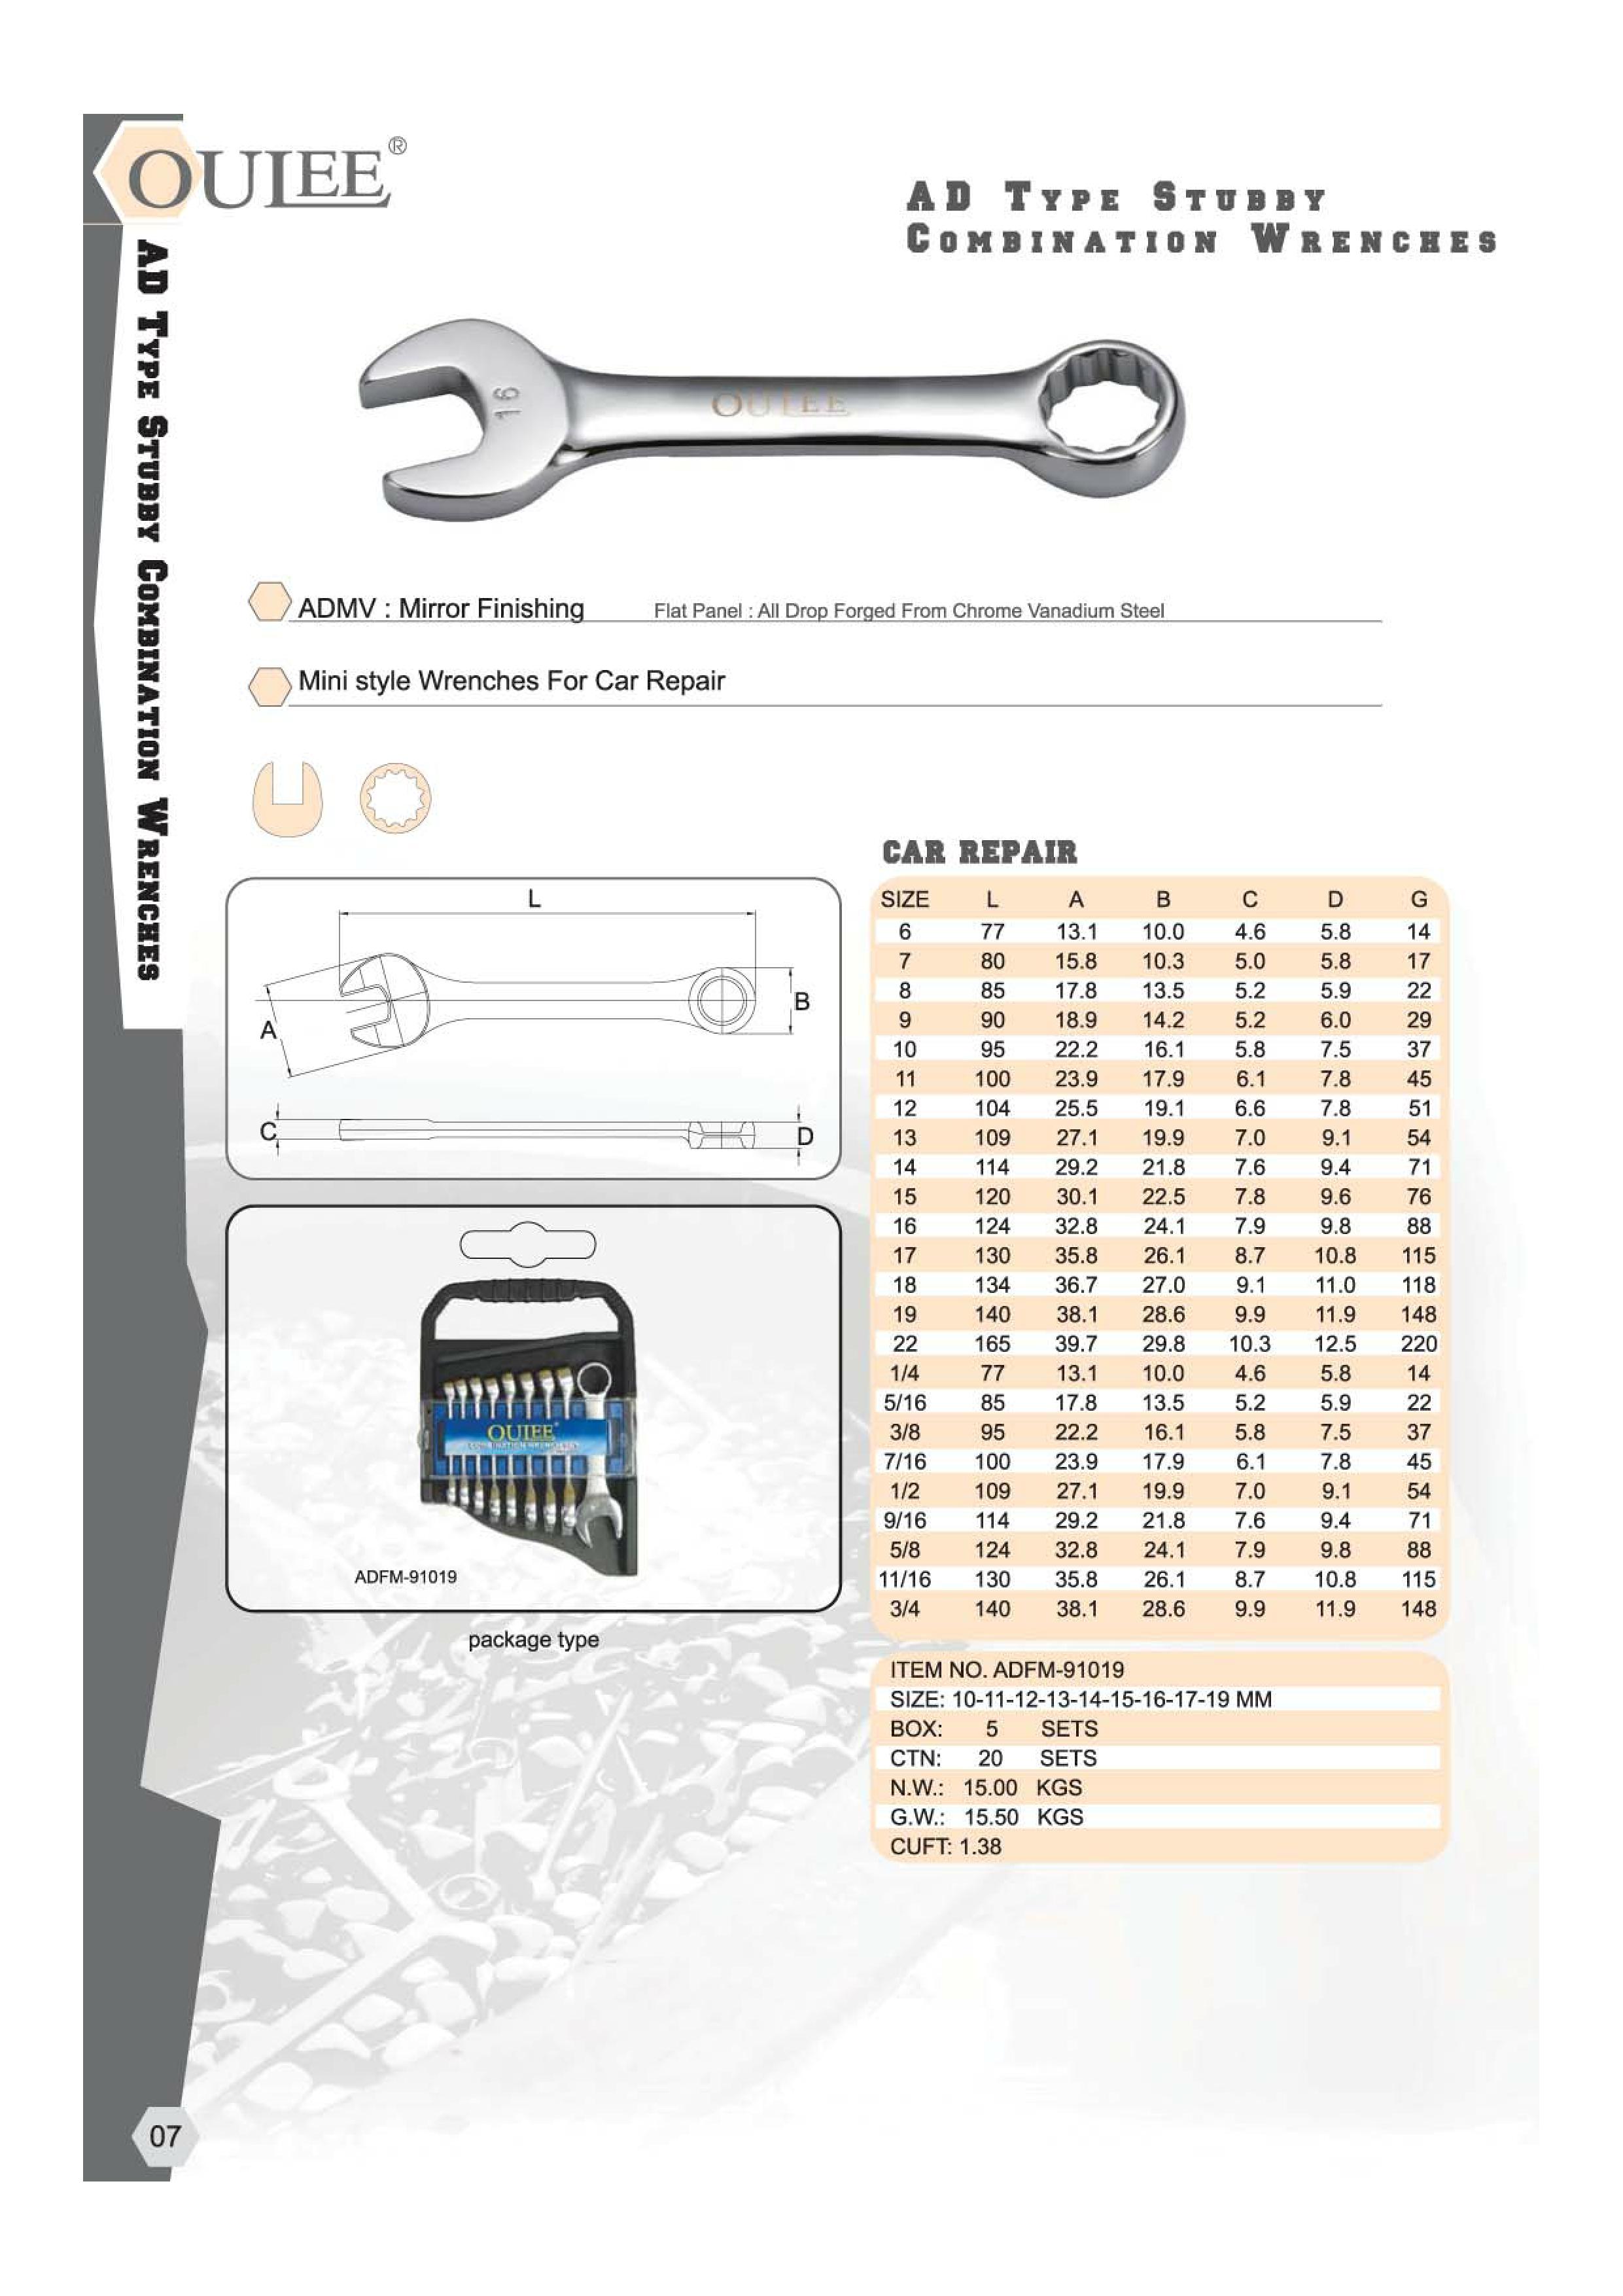 AD type stubby combination wrenches